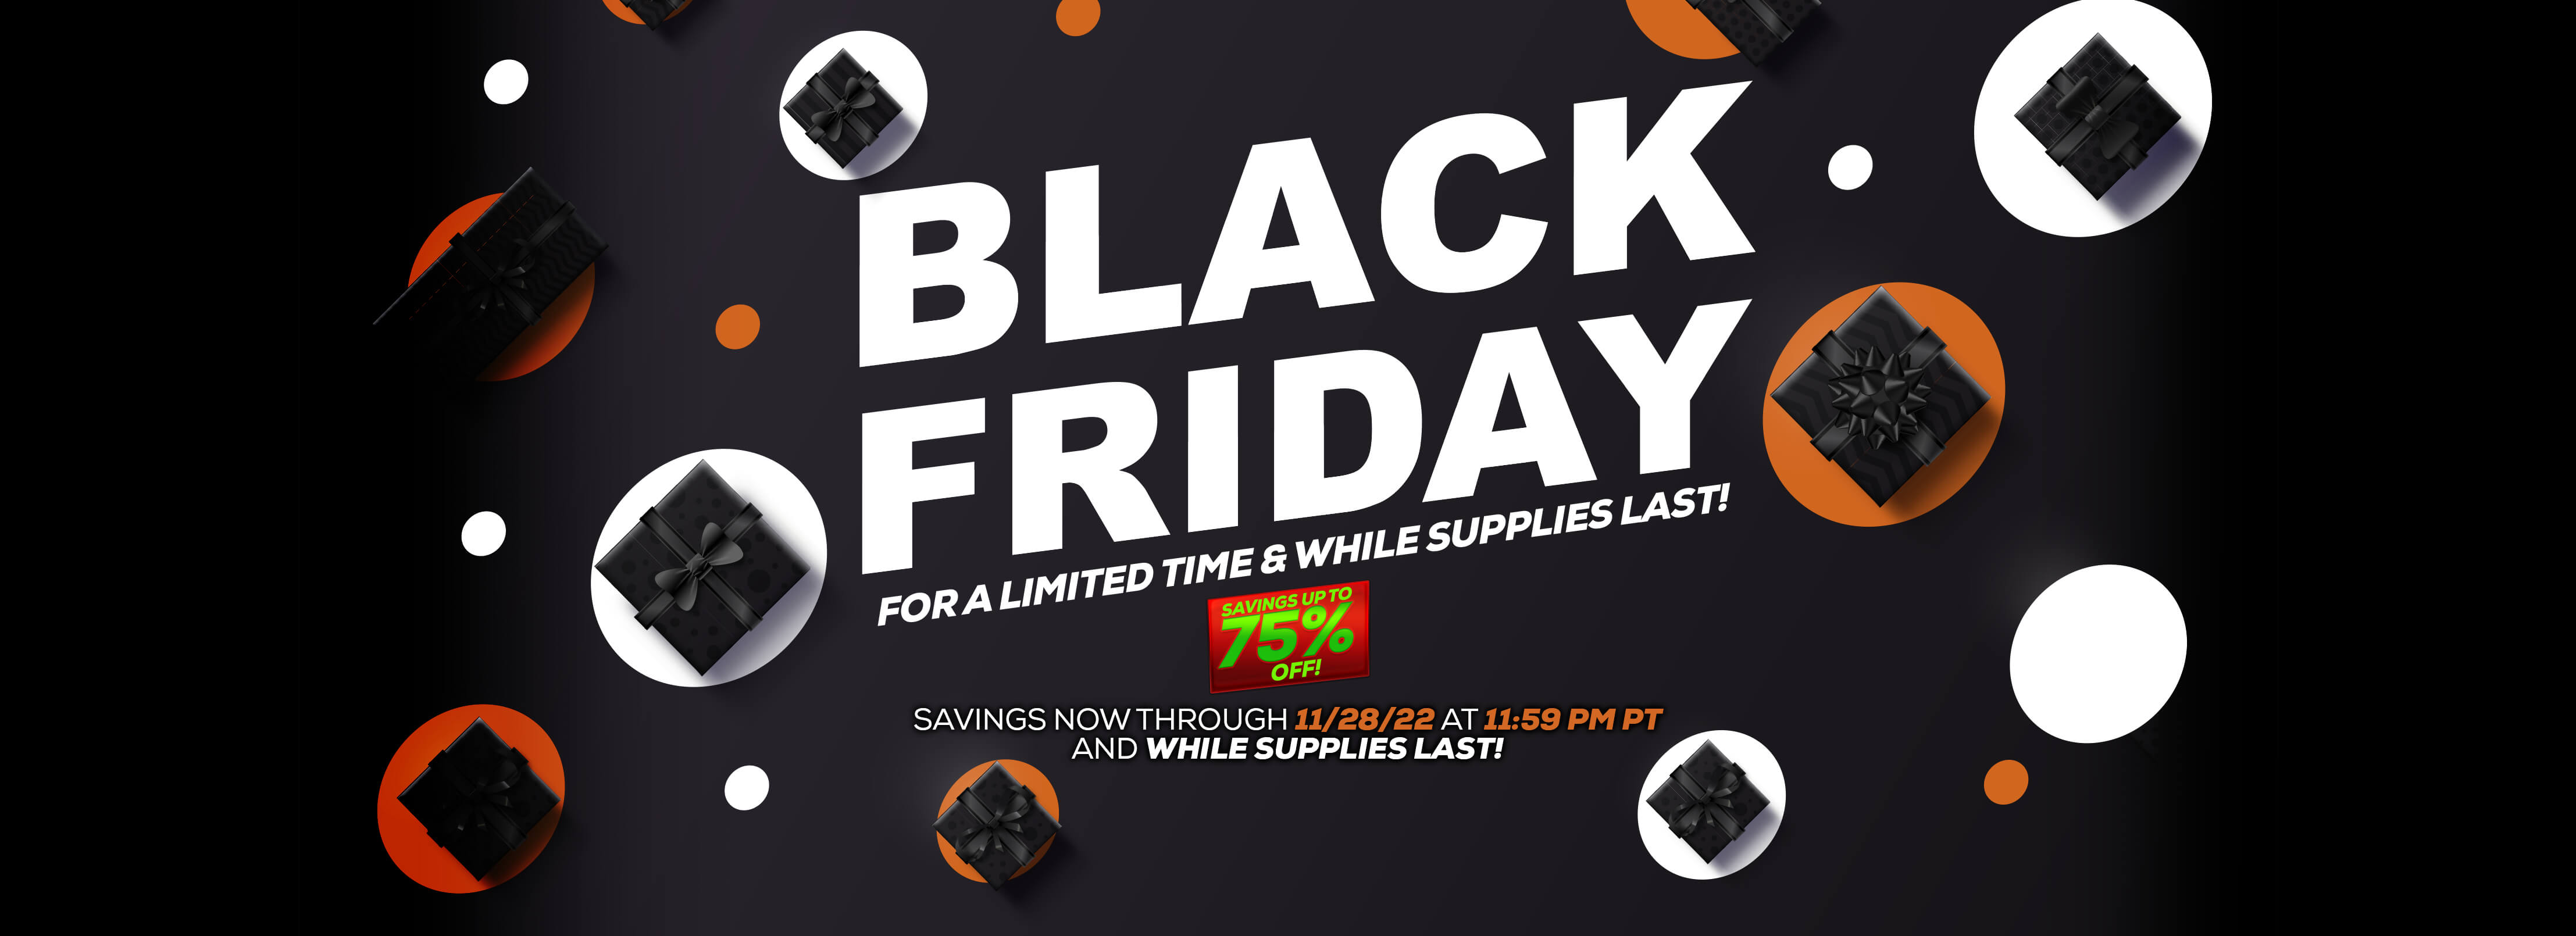 BLACK FRIDAY DEALS ARE HERE!